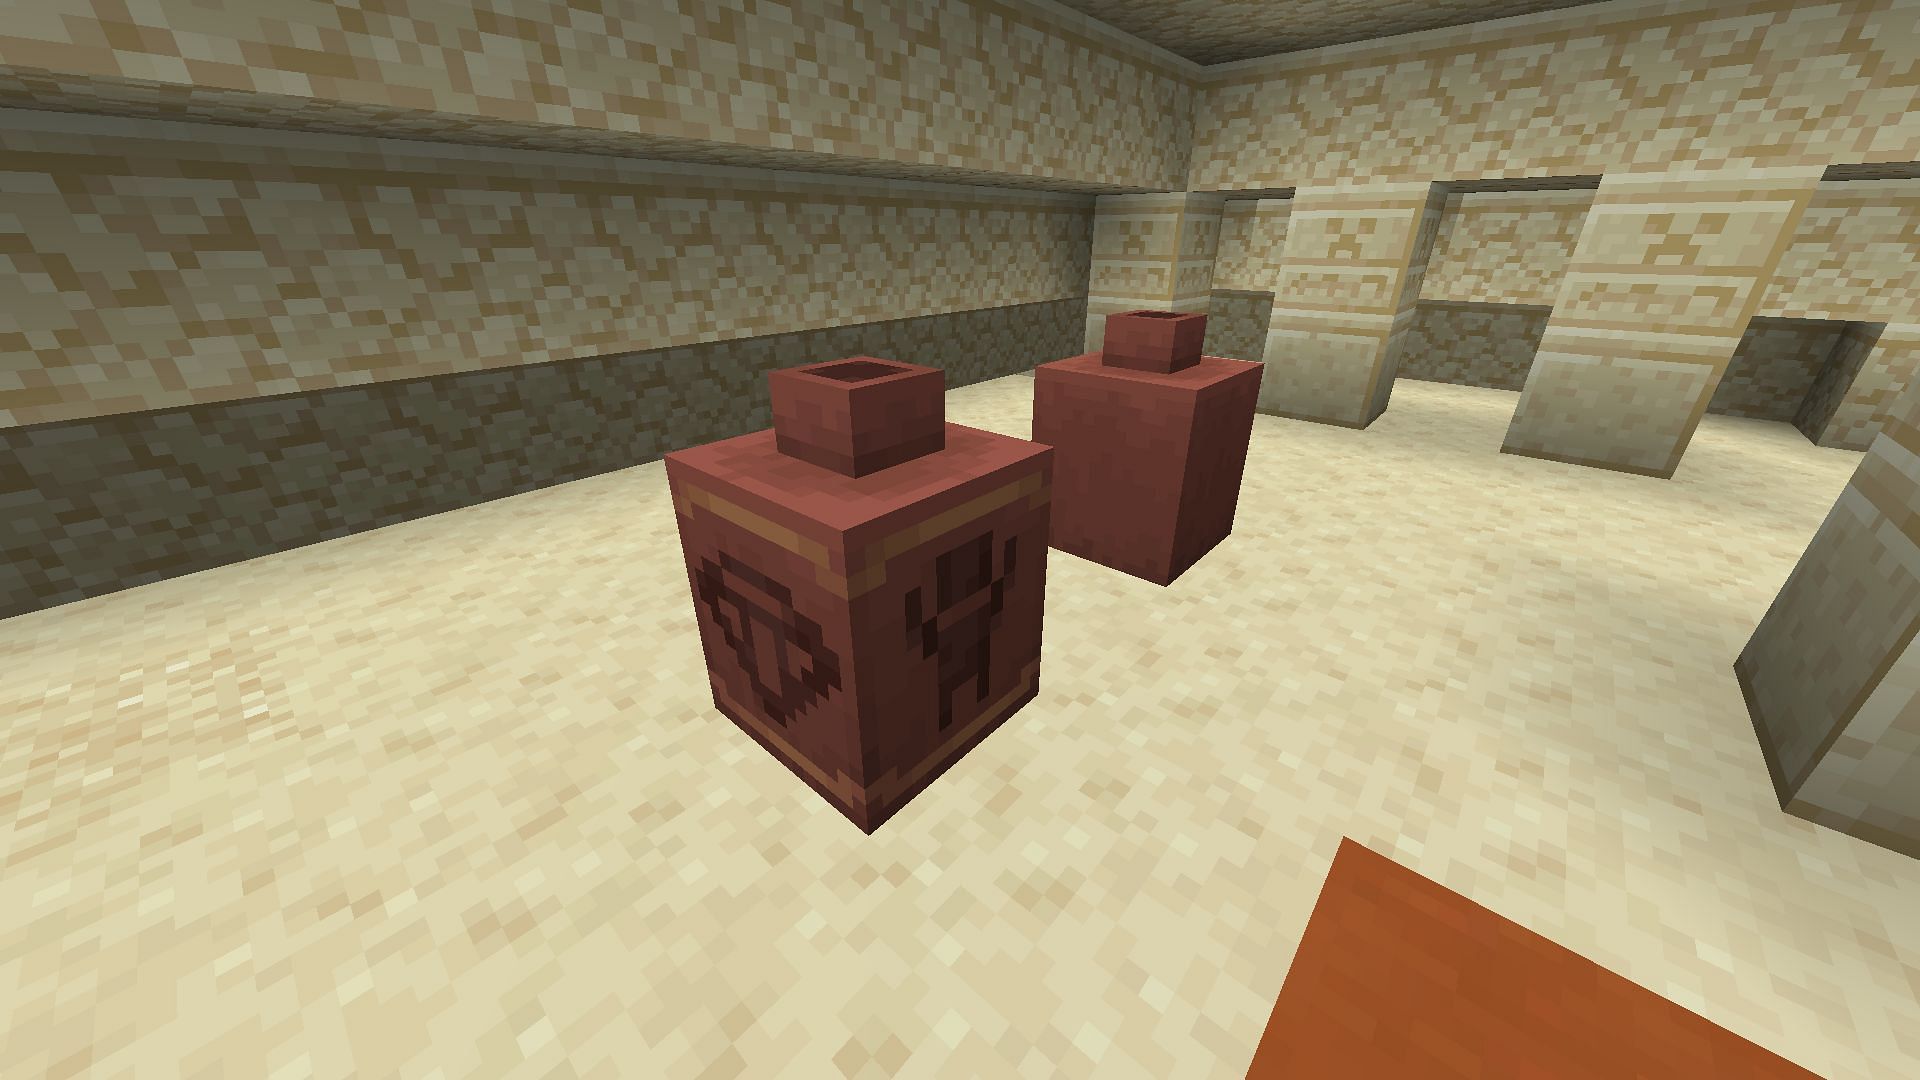 Decorated pots are new decoration blocks in Minecraft 1.20 Trails and Tales update (Image via Mojang)